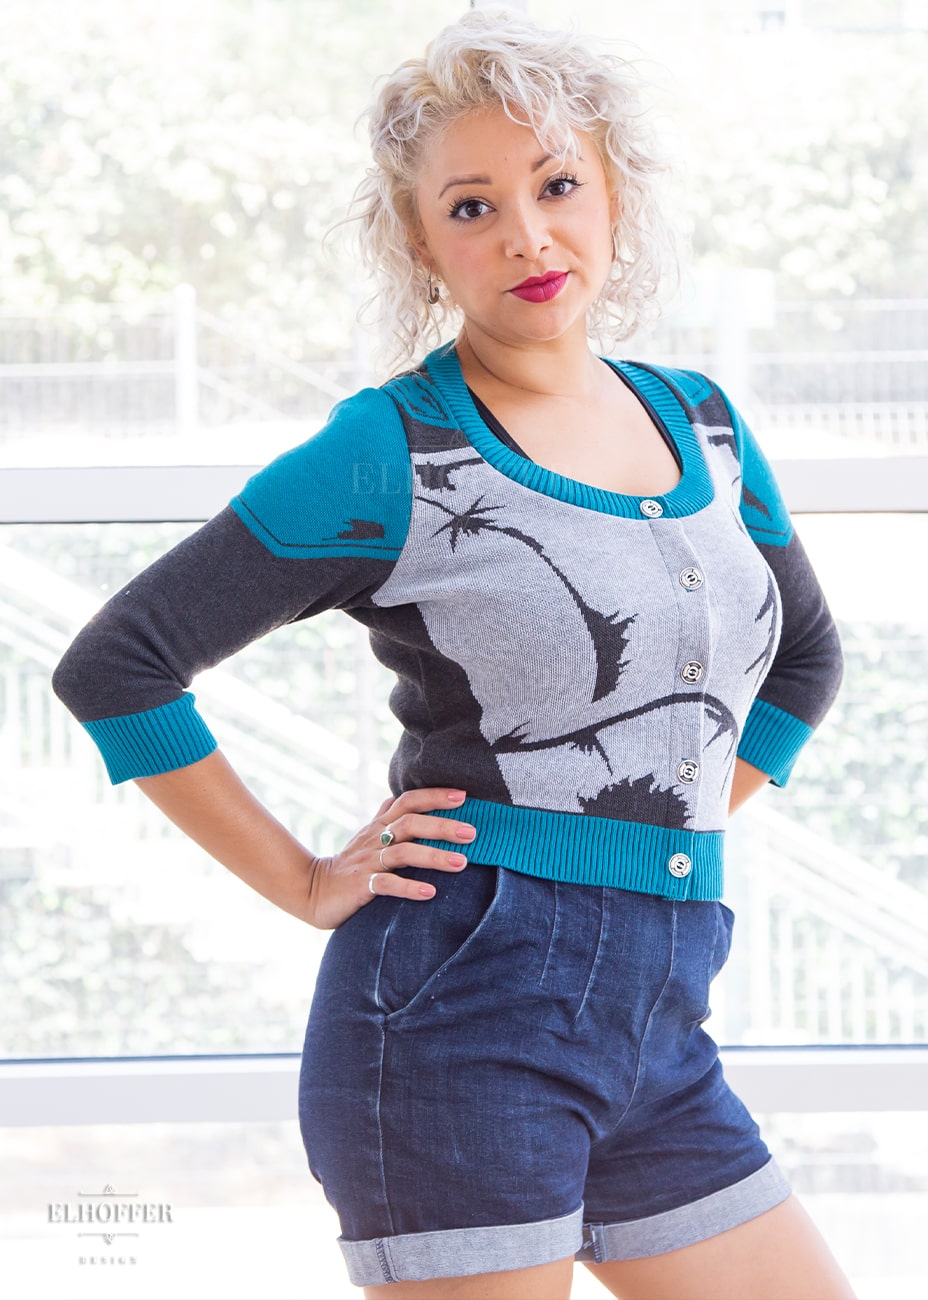 Simone, a size small model with light olive skin and curly platinum hair, is wearing a cropped button up knit cardigan with 3/4 sleeves. The cardigan front is mainly a light grey with dark grey decorative lines that give the impression of battle damaged armor, with teal at the shoulders, and the bottom half of the sleeve and back of the cardigan are a dark grey. The neckine, bottom, and cuffs are all teal ribbing.